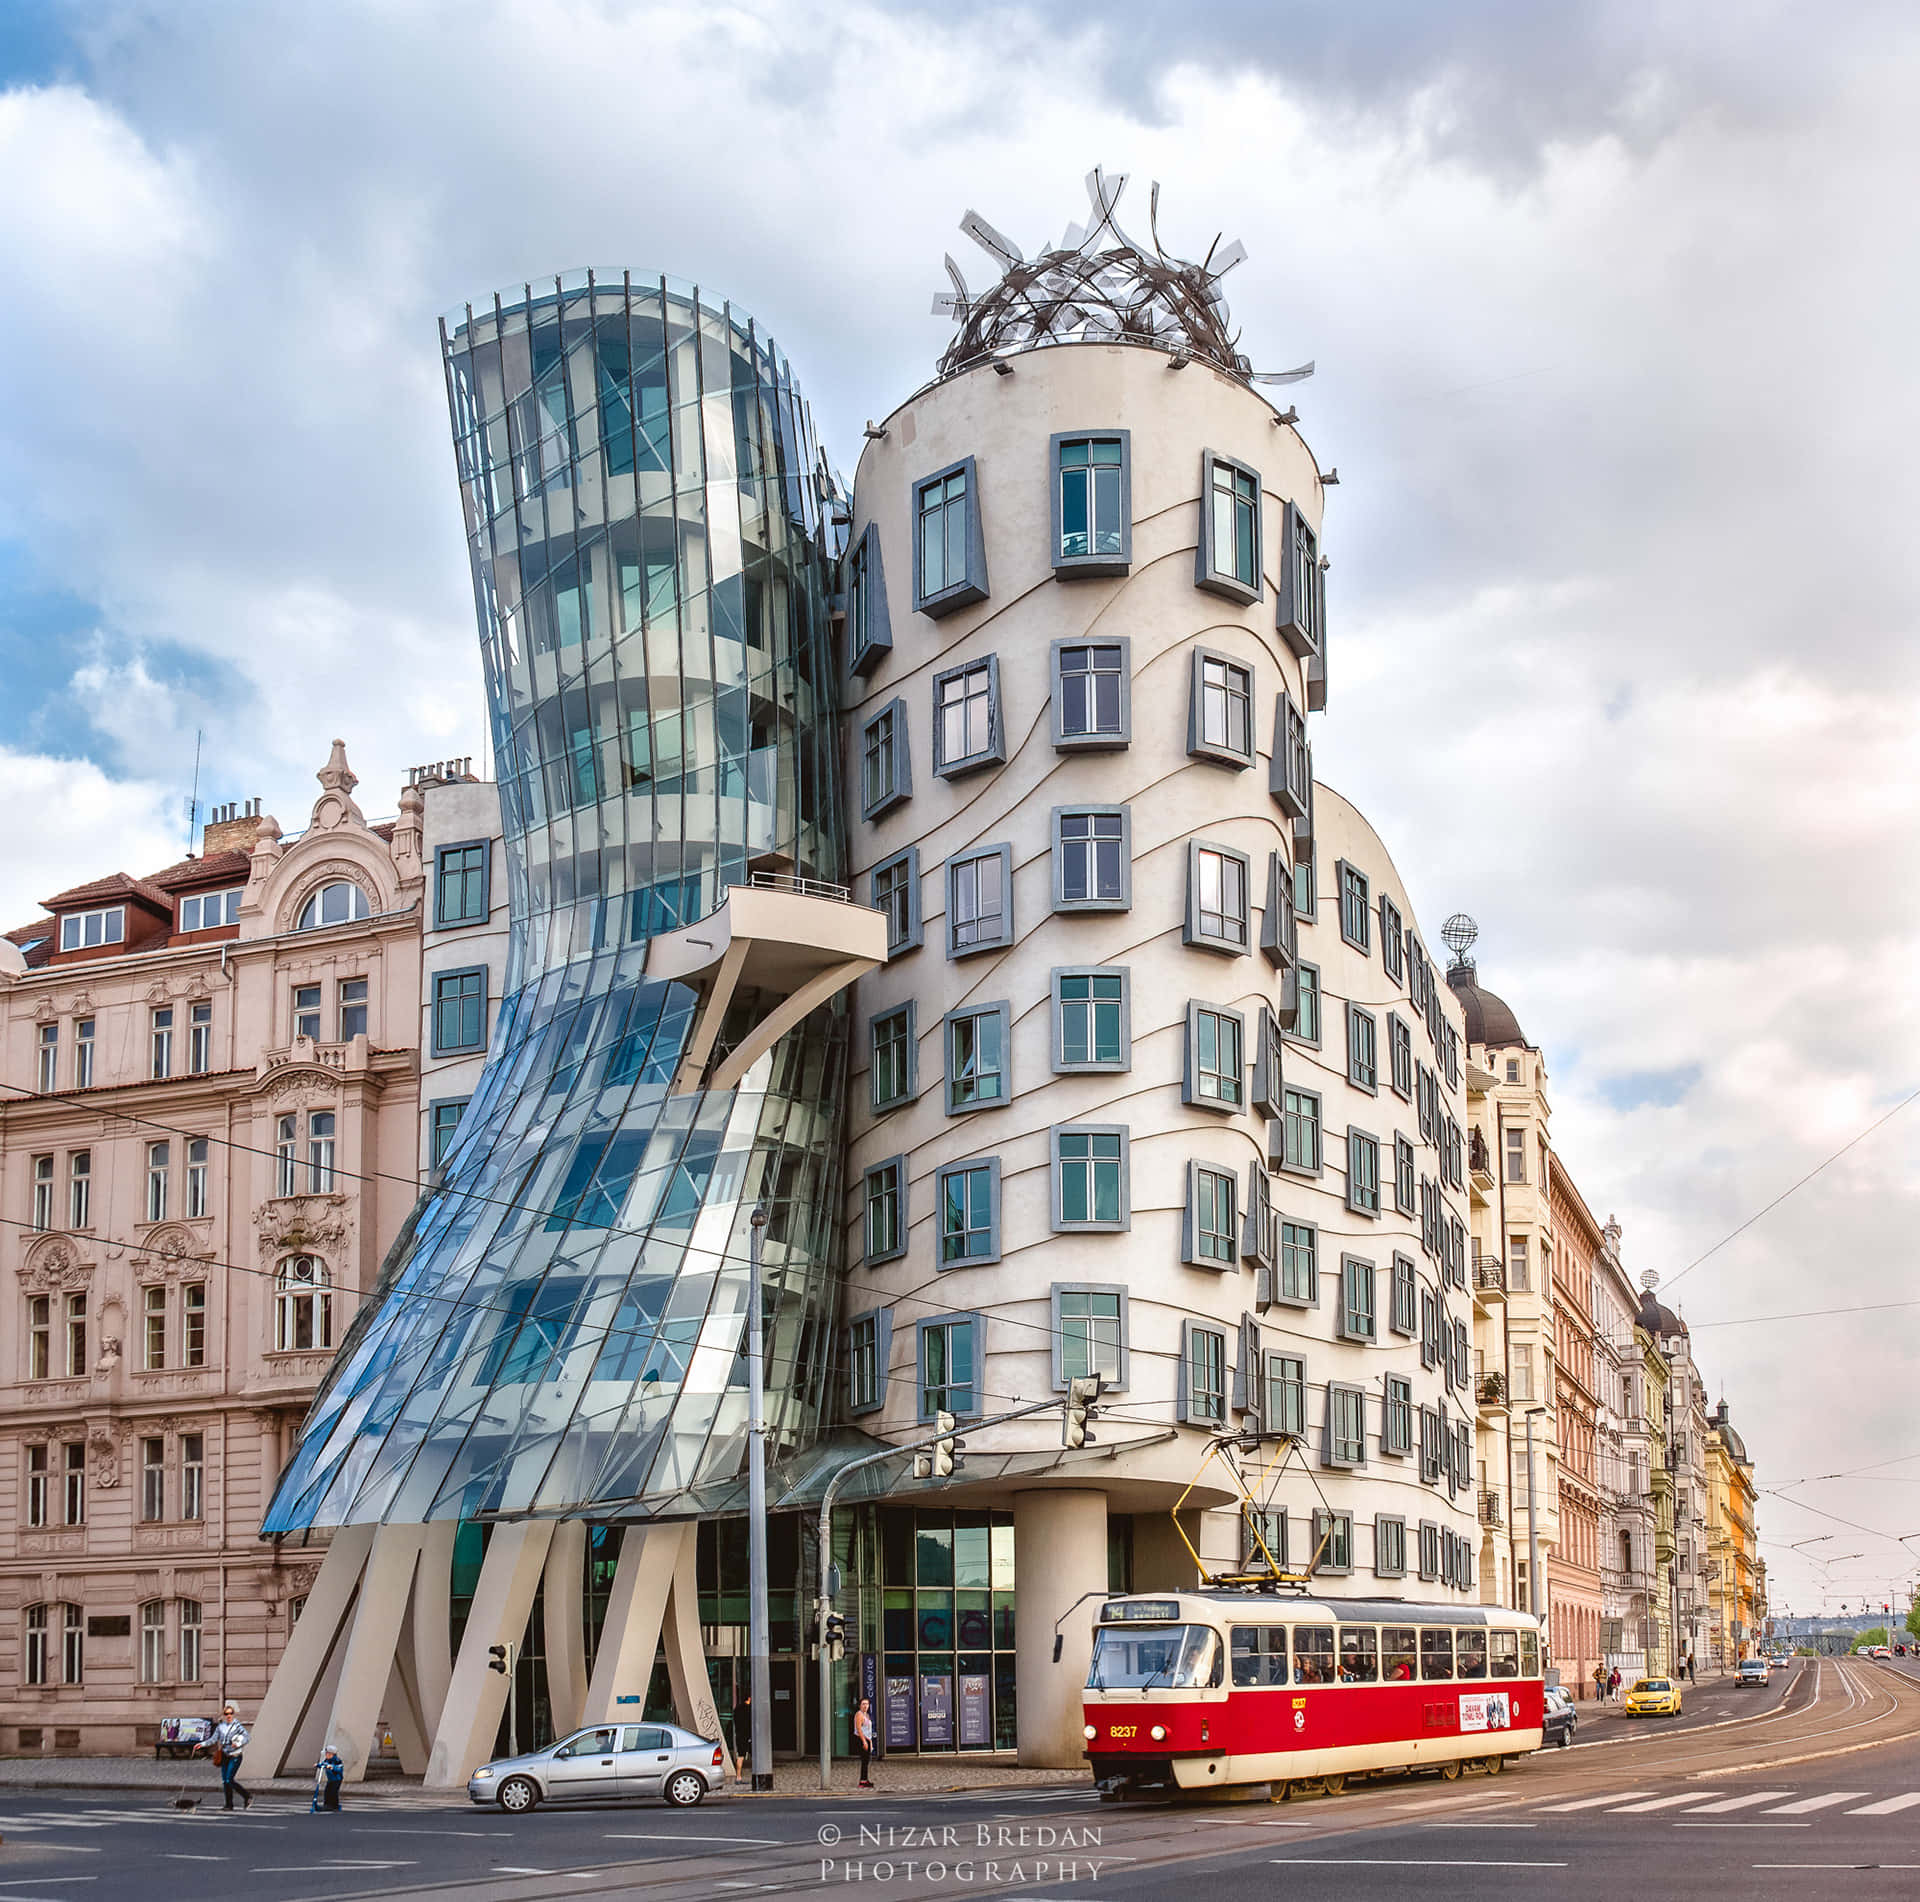 "Tram Passing by the Dancing House in Prague" Wallpaper